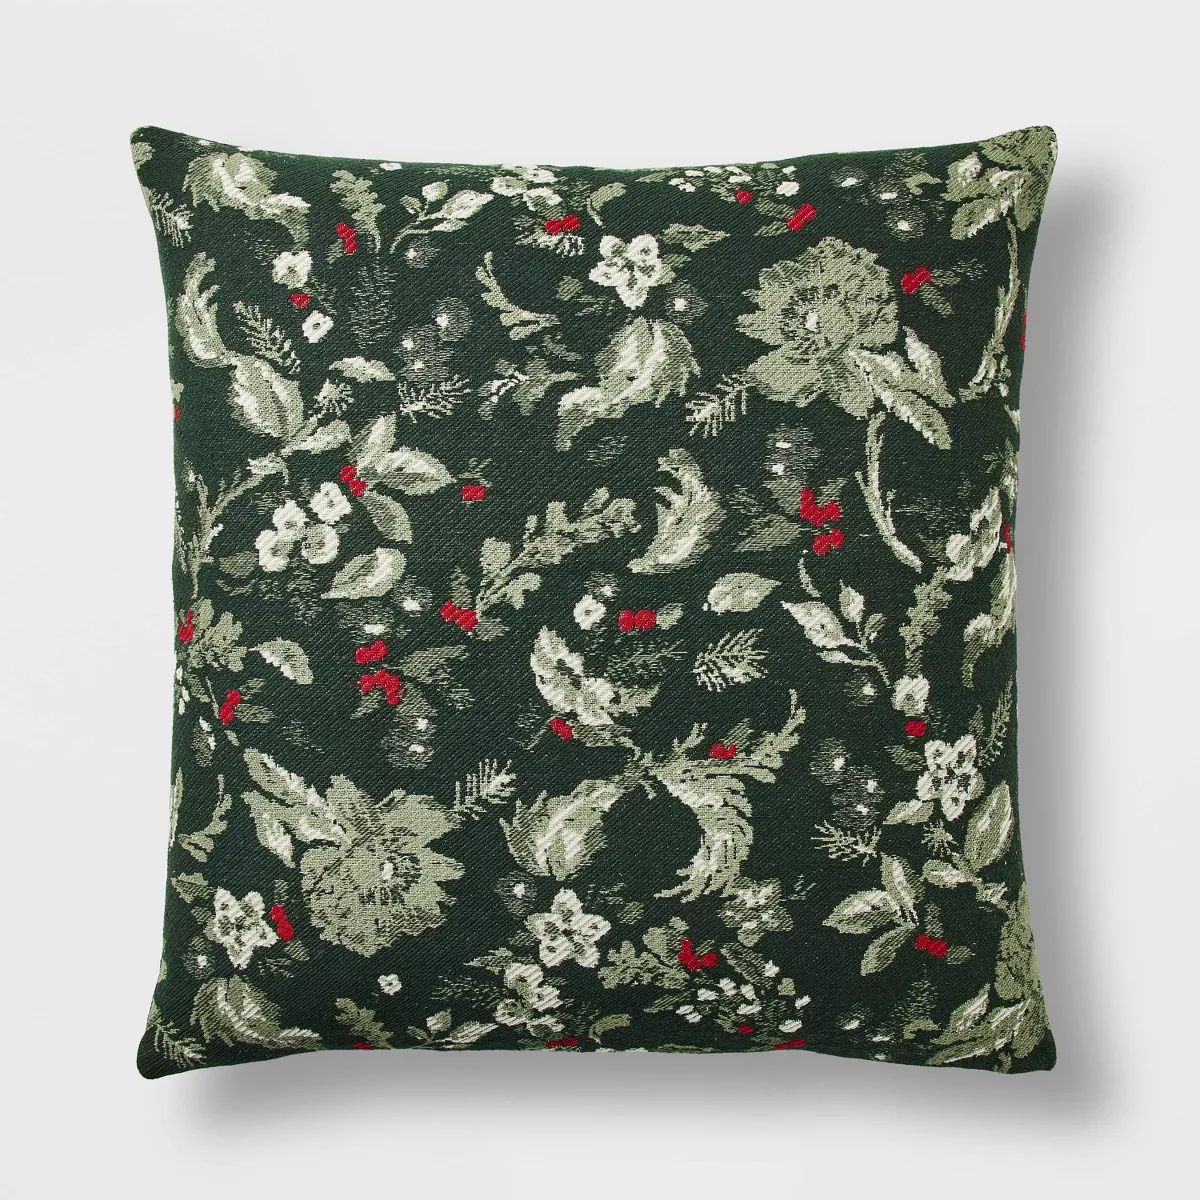 Oversized Printed Floral Square Throw Pillow - Threshold™ designed with Studio McGee | Target